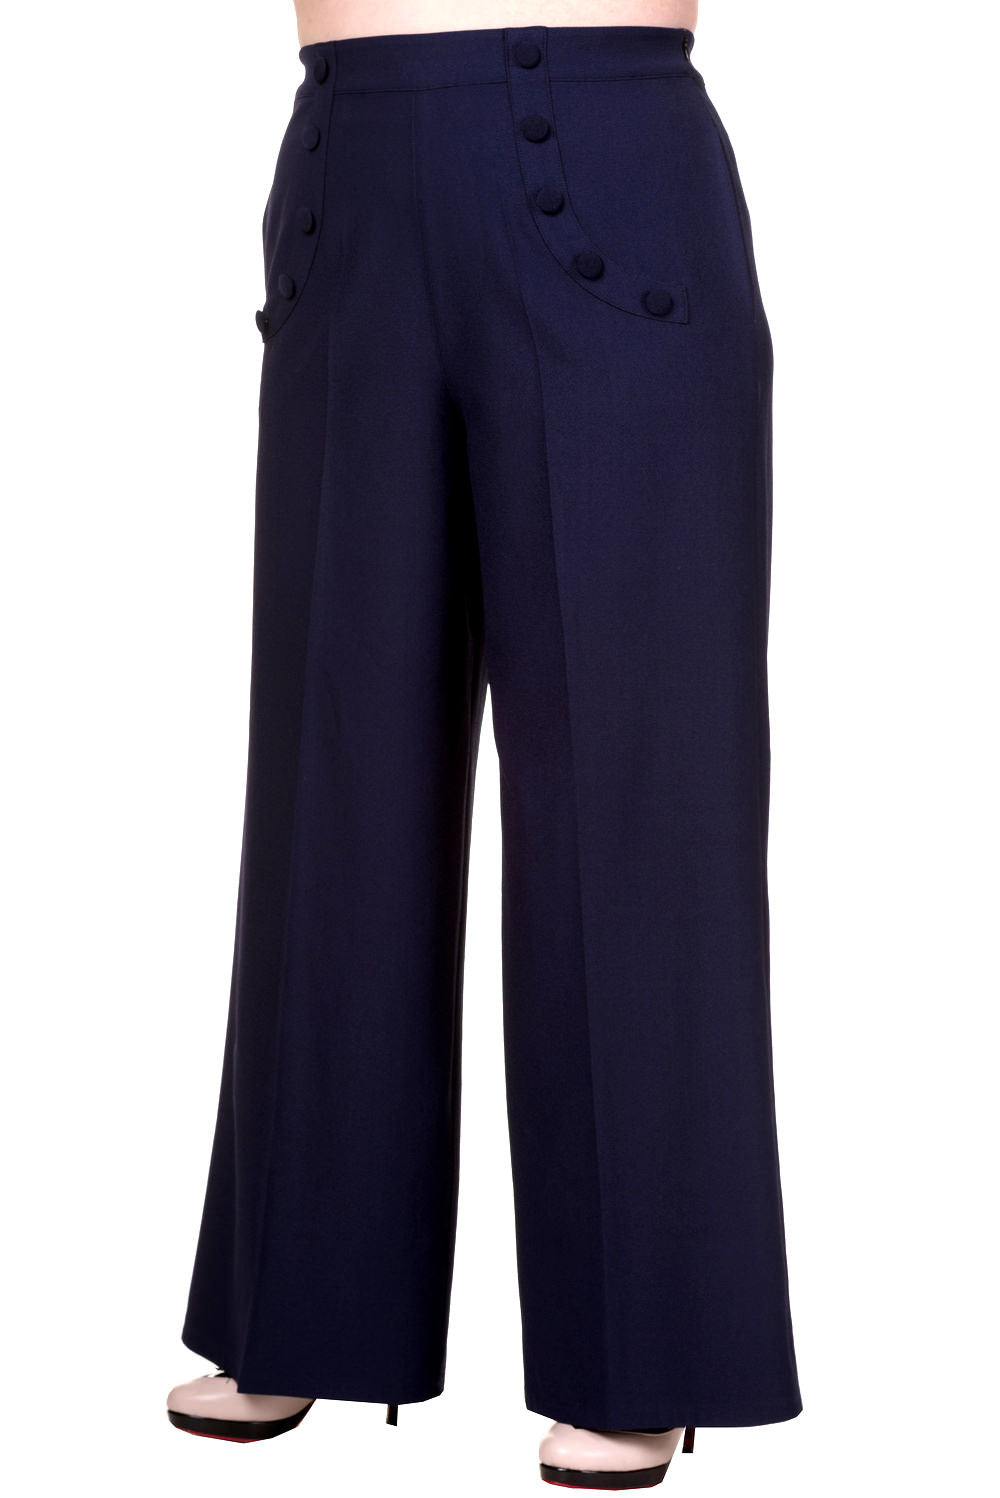 Full Moon Trousers in Navy Blue by Banned – Isabel’s Retro & Vintage ...